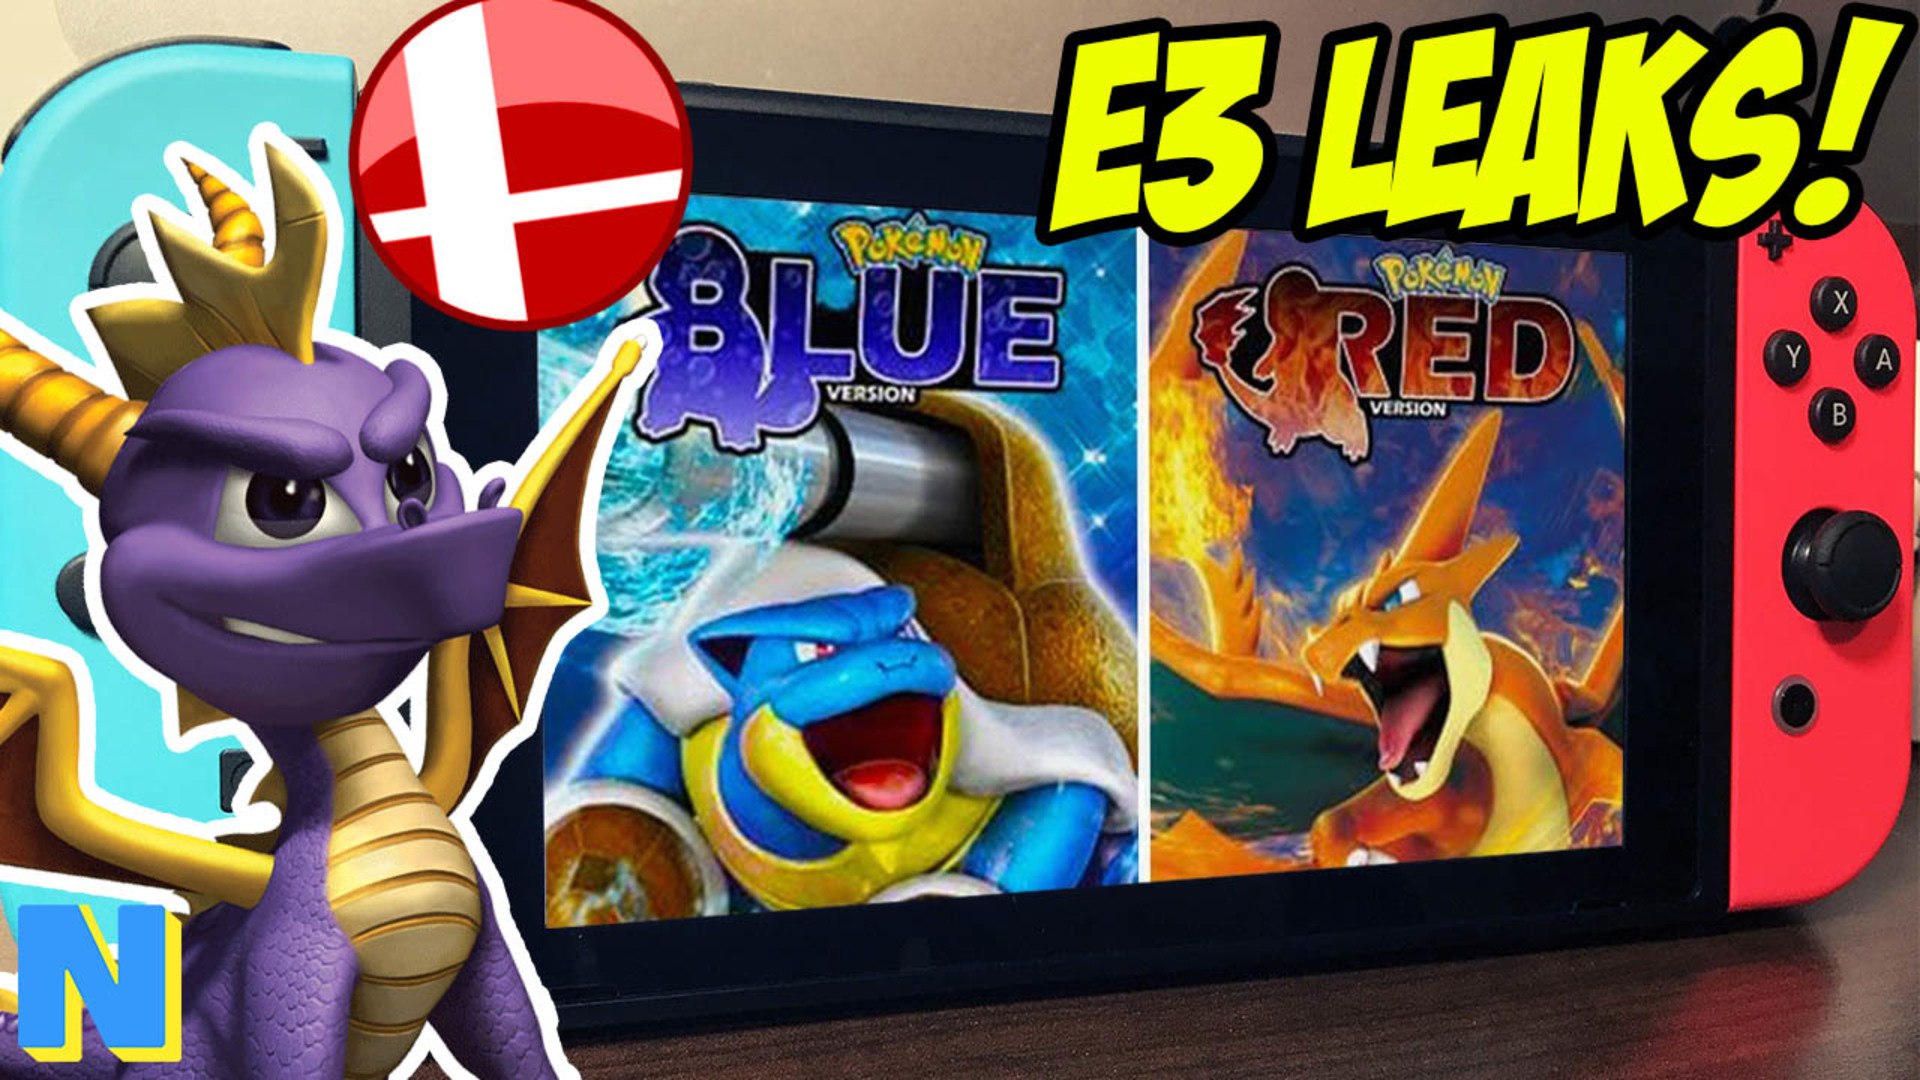 Pokemon Switch, Super Smash Brothers & MORE E3 Nintendo Leaks | NW News -  video Dailymotion